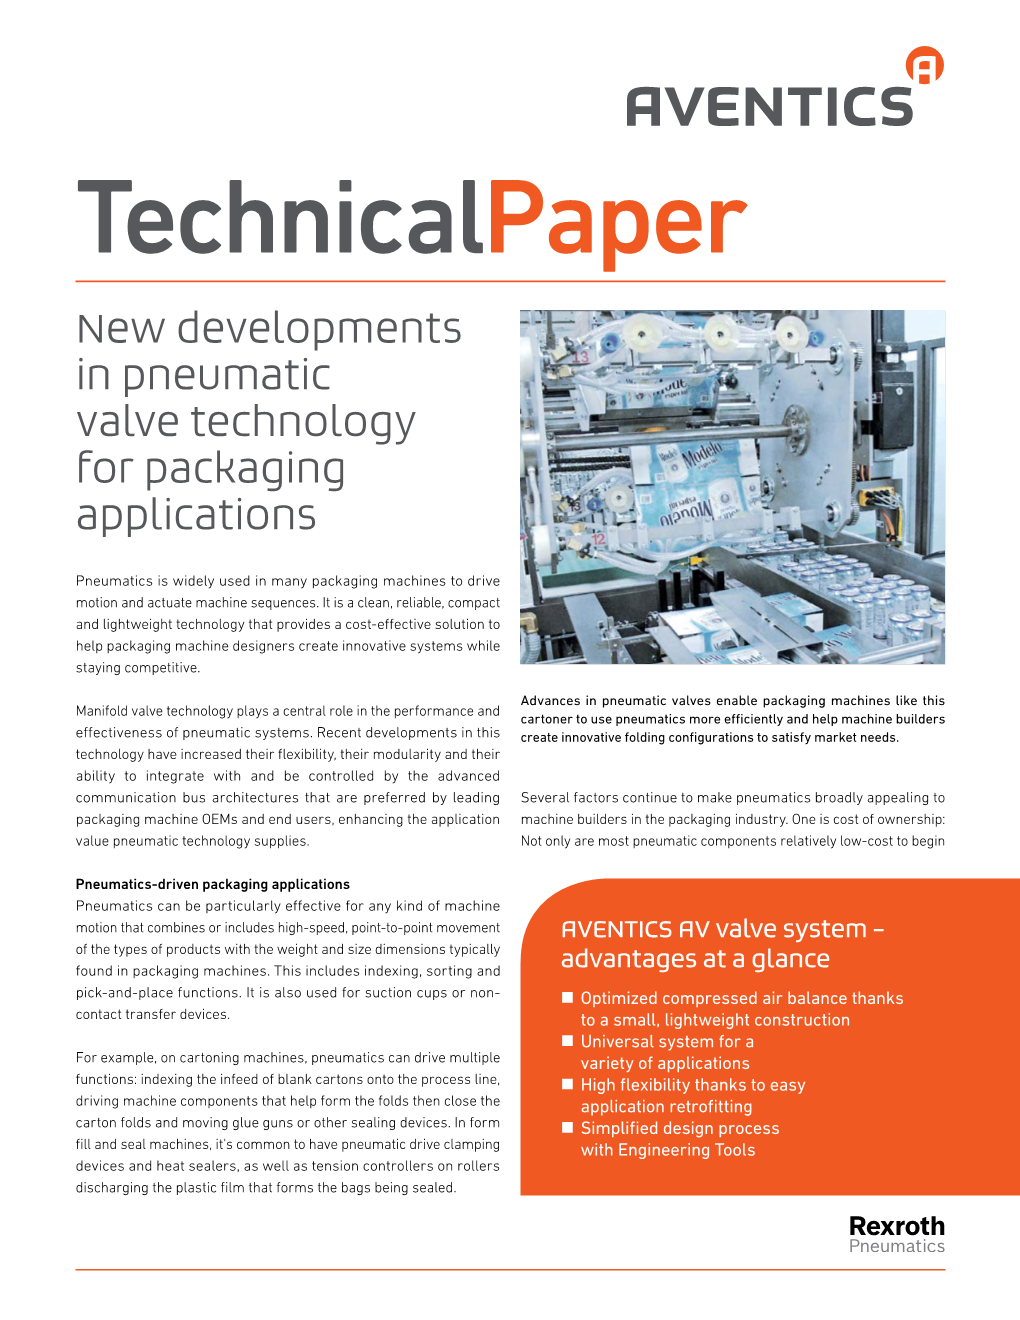 New Developments in Pneumatic Valve Technology for Packaging Applications